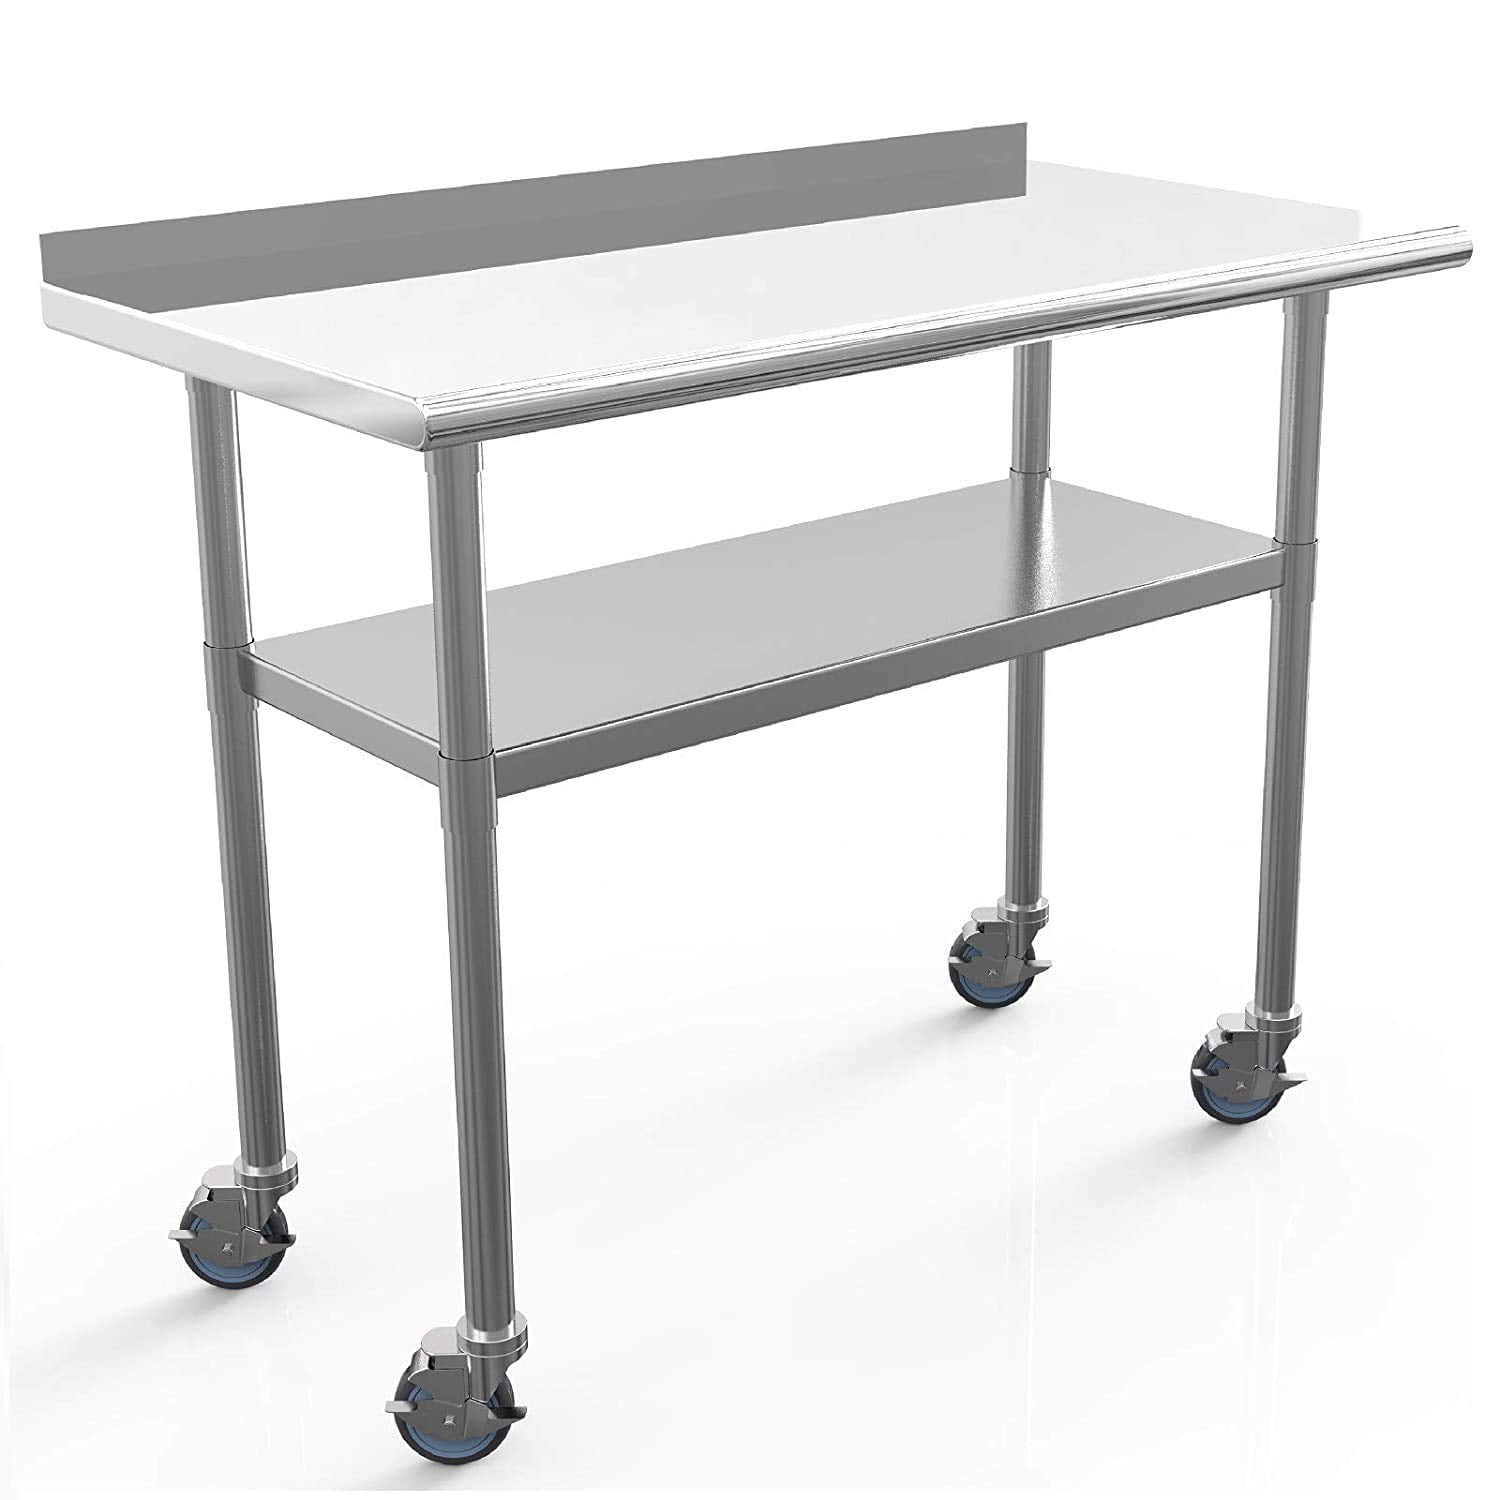 Kitchen Table Commercial Heavy Duty Workbench Garage Worktable with Adjustable Height Undershelf for Restaurant Home ROVSUN 48 x 24 Stainless Steel Prep & Work Table Hotel